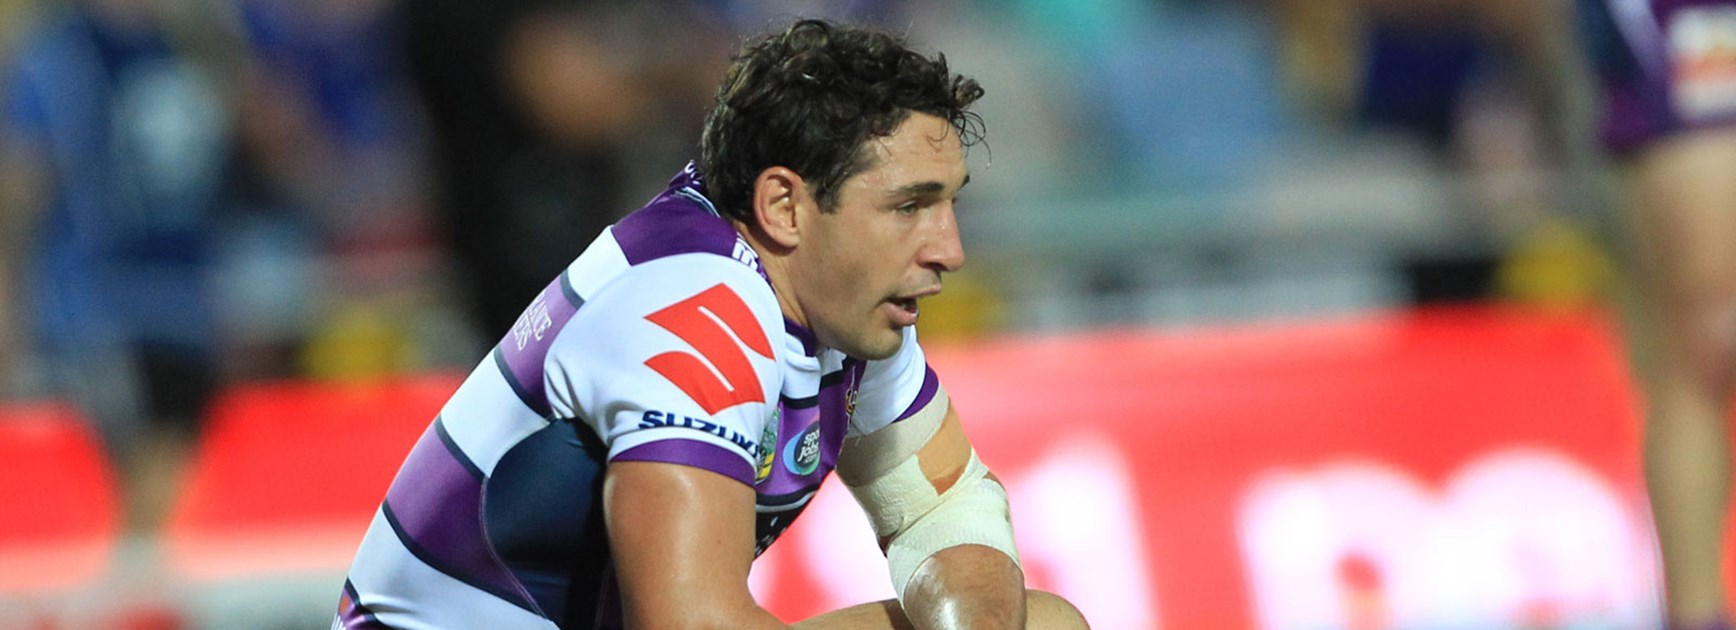 Storm superstar Billy Slater will need to be fully fit to be selected in the Queensland team for Game One.